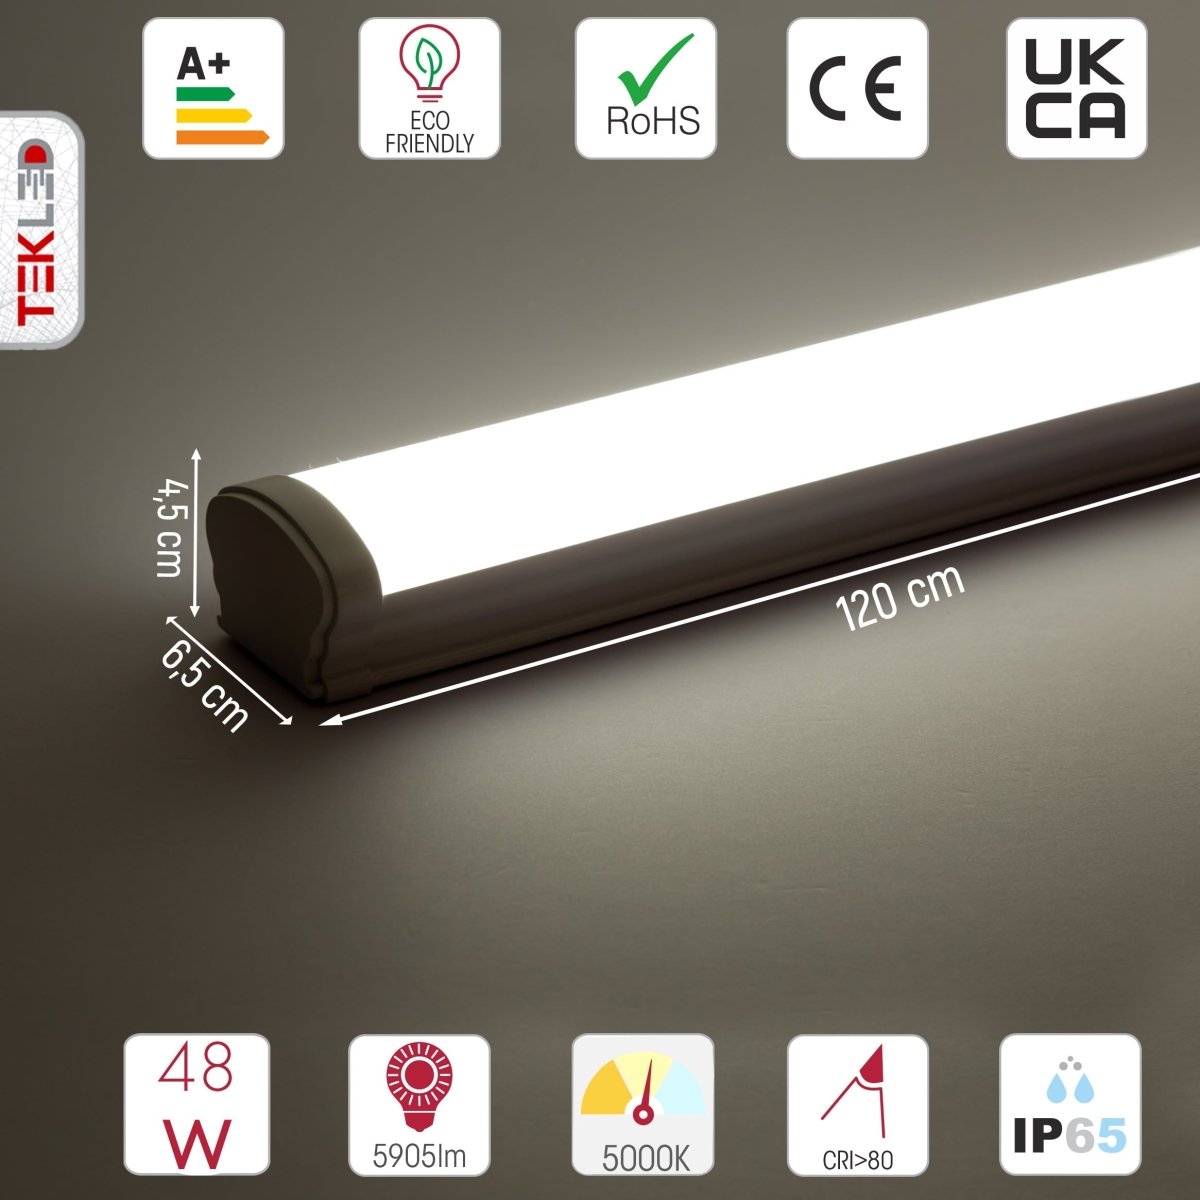 Technical specs and measurements for LED Tri-proof Batten Linear Fitting 48W 5000K Cool White IP65 120cm 4ft